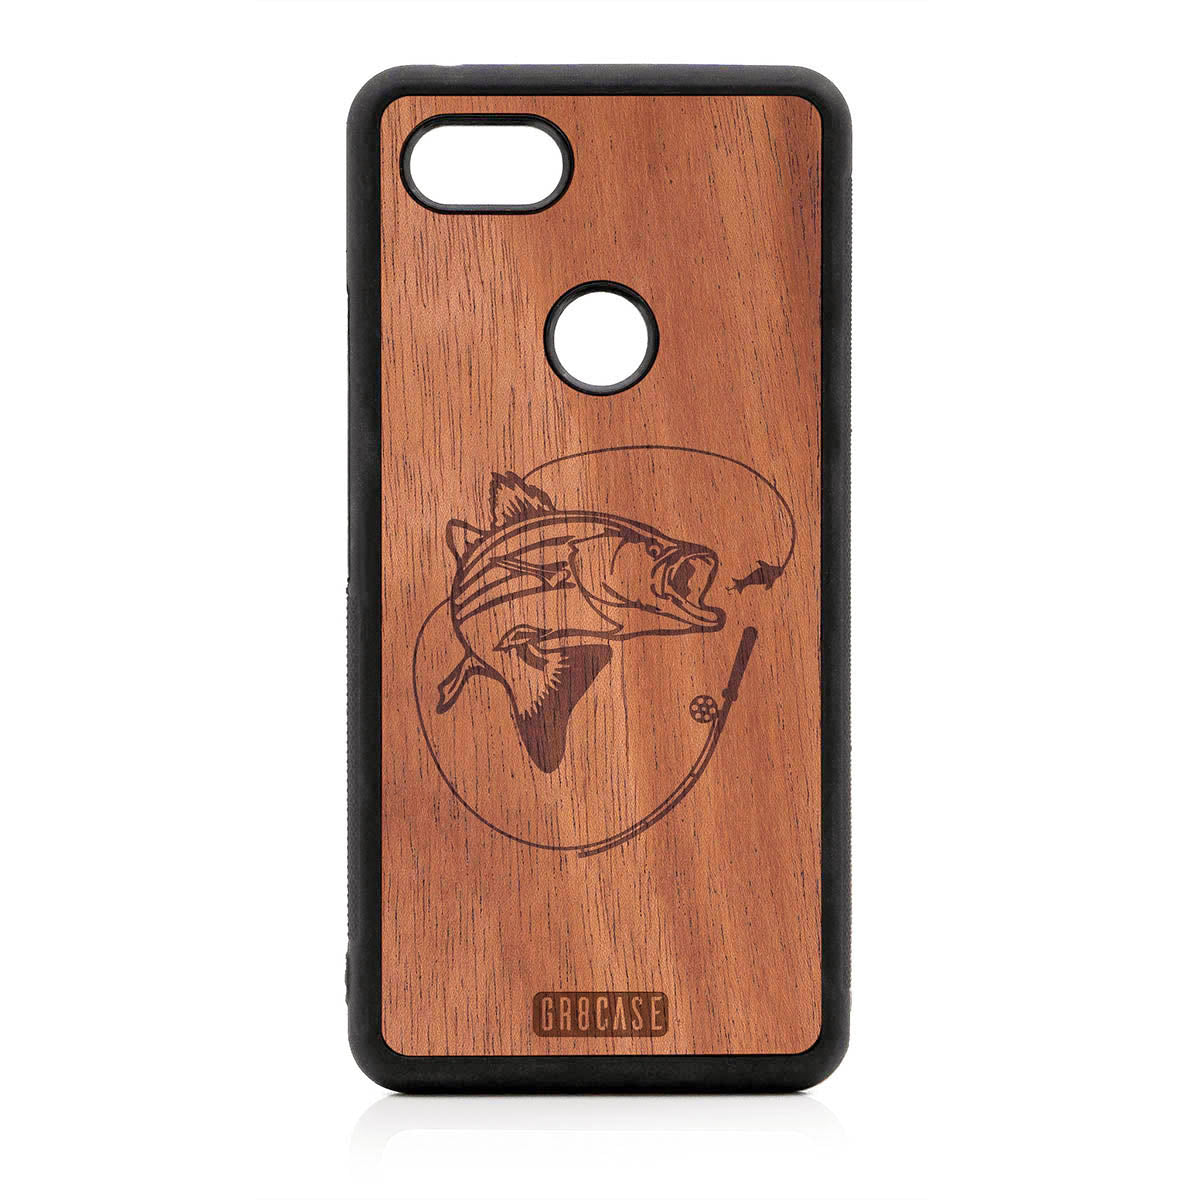 Fish and Reel Design Wood Case For Google Pixel 3 XL by GR8CASE